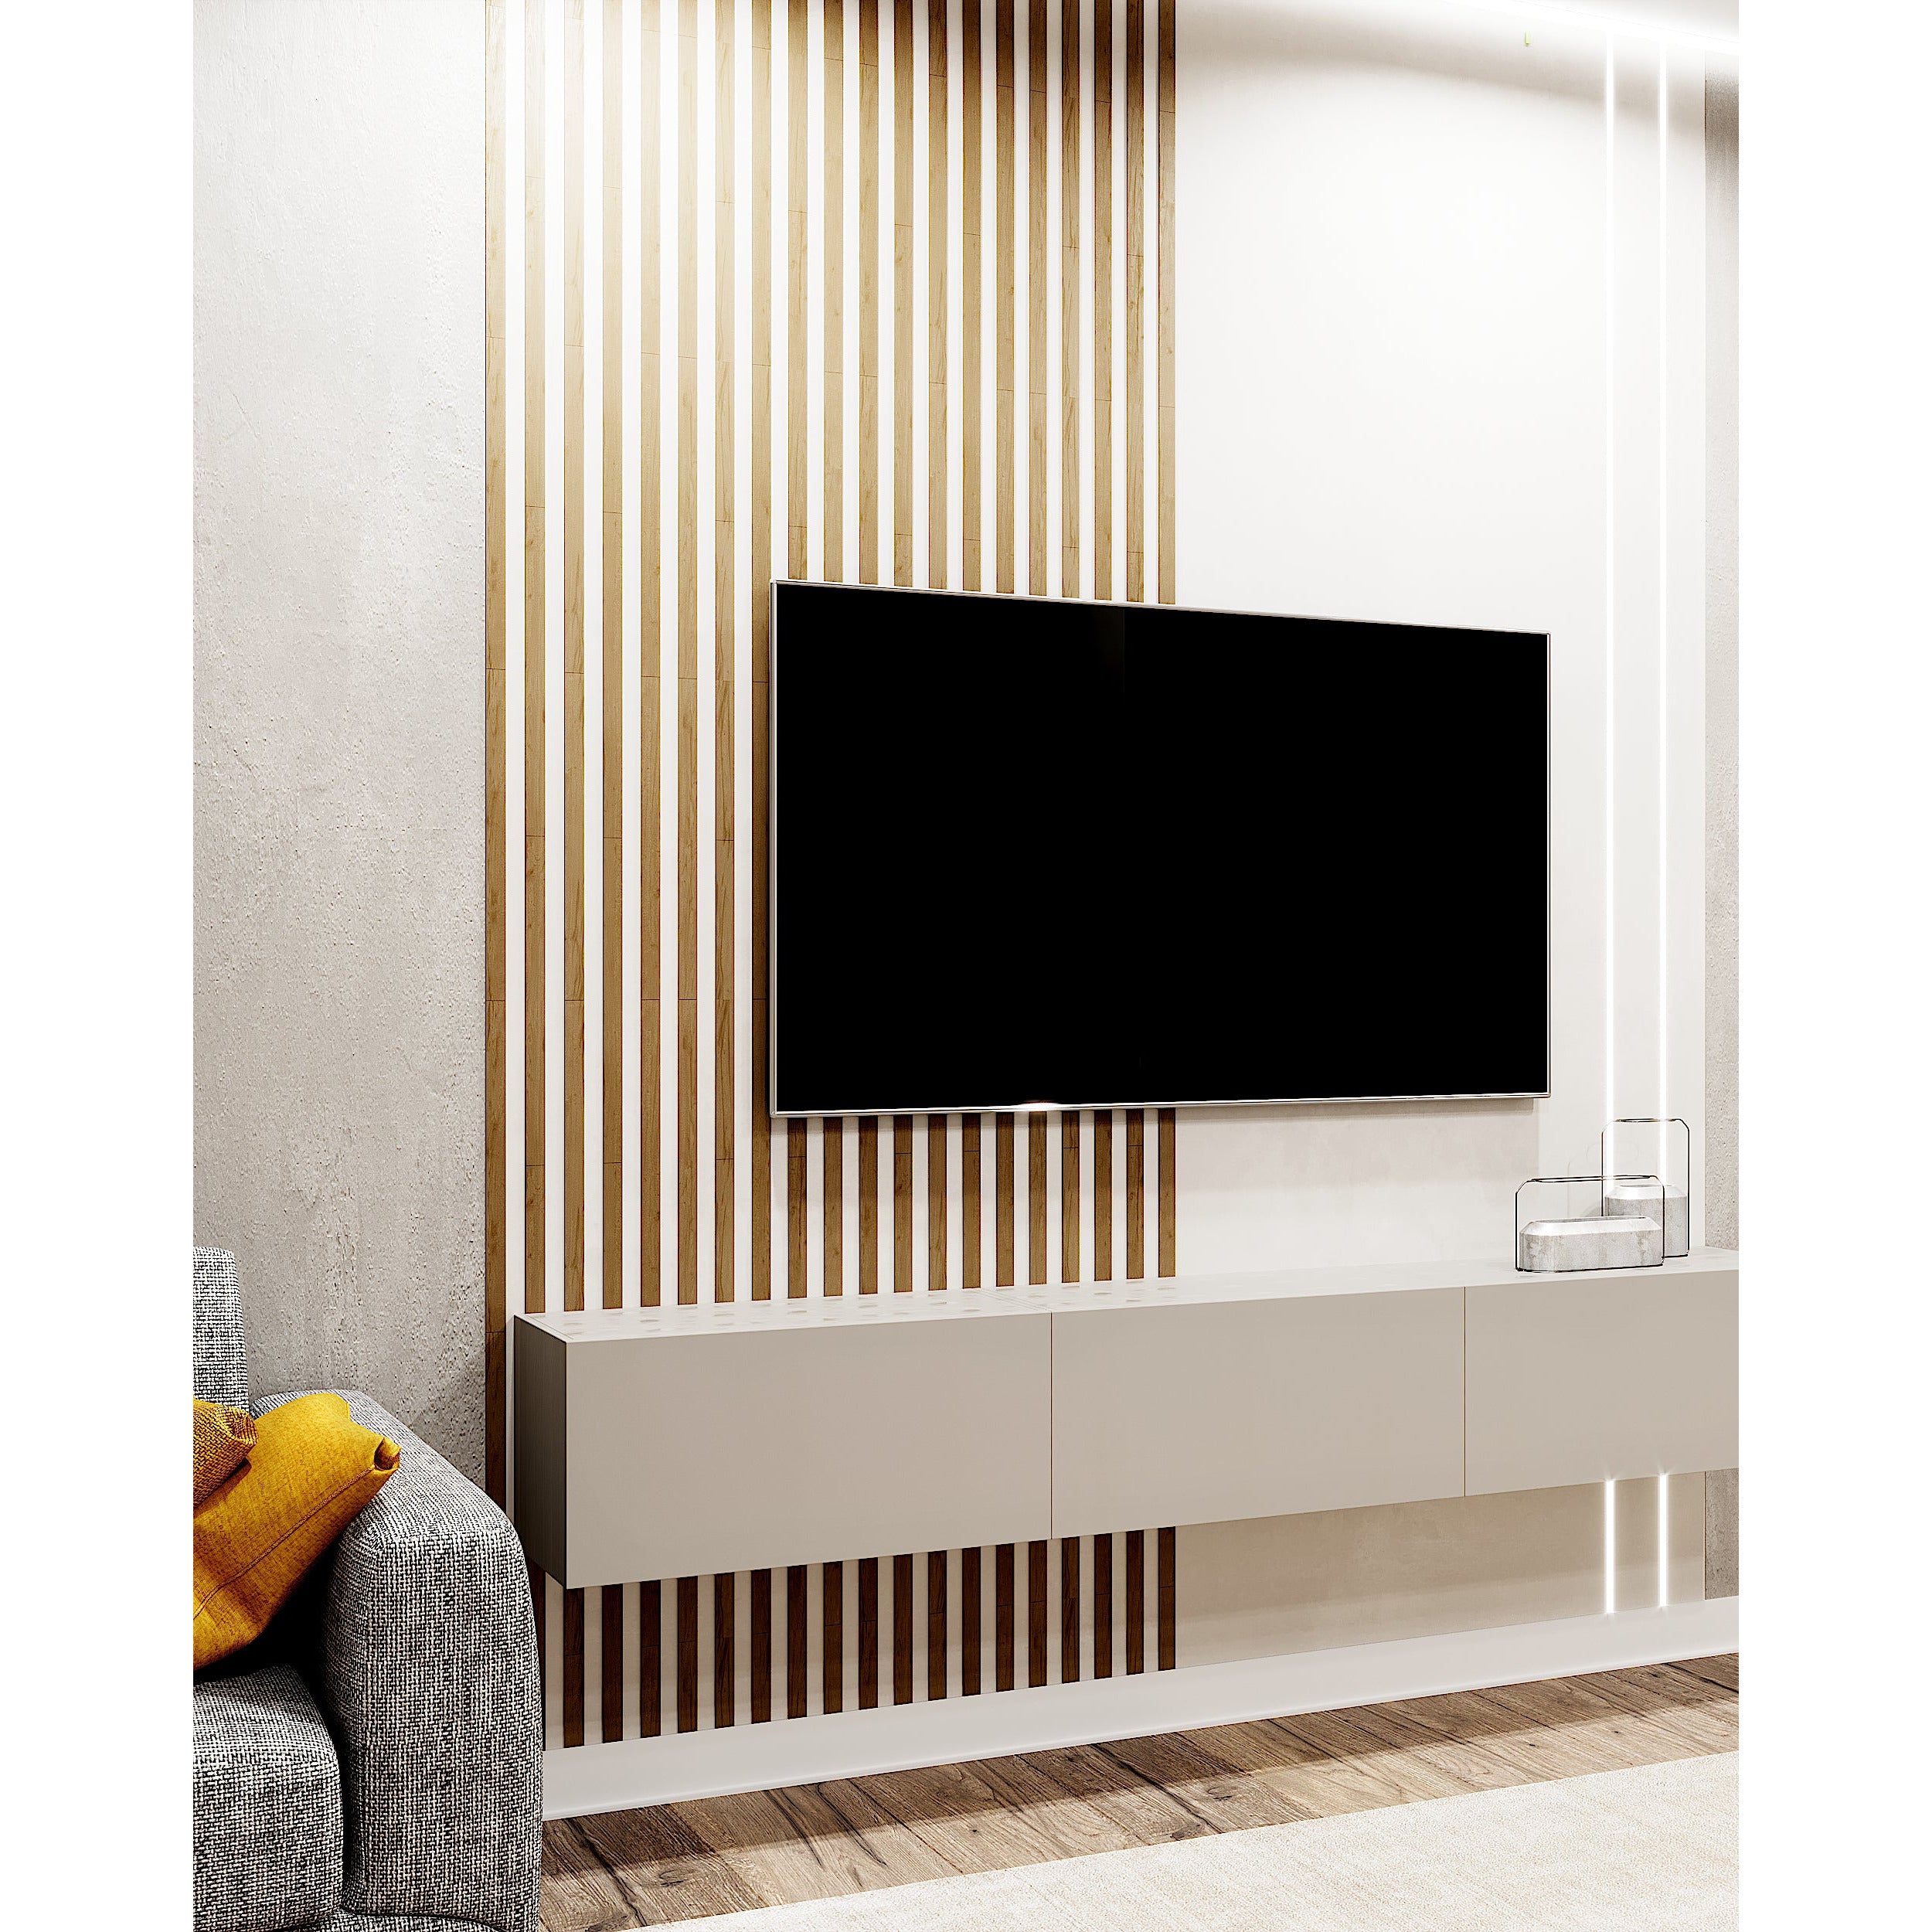 wood wall slats panels from USA panels Located behind TV